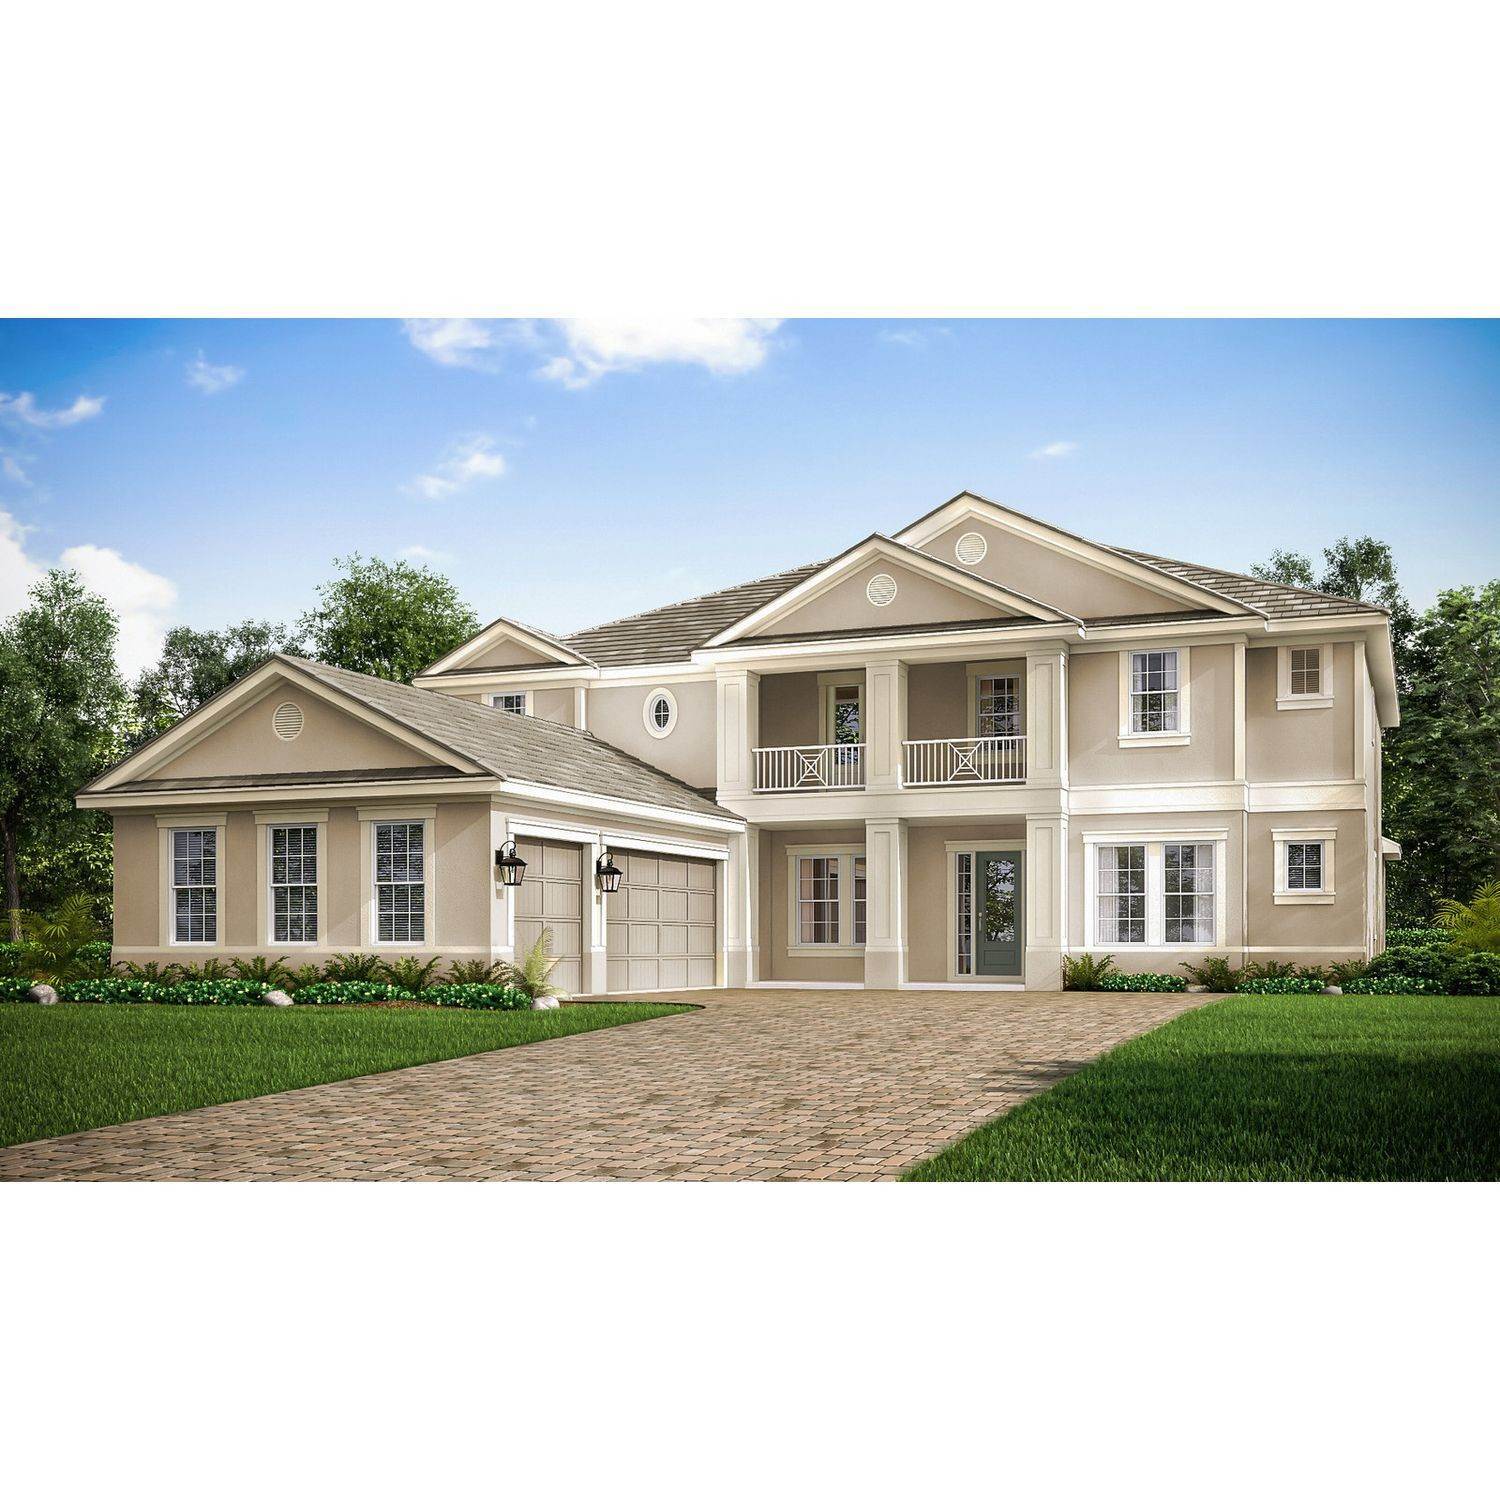 Single Family for Sale at River's Edge - Forsyth 2526 Meander Cove WESLEY CHAPEL, FLORIDA 33543 UNITED STATES